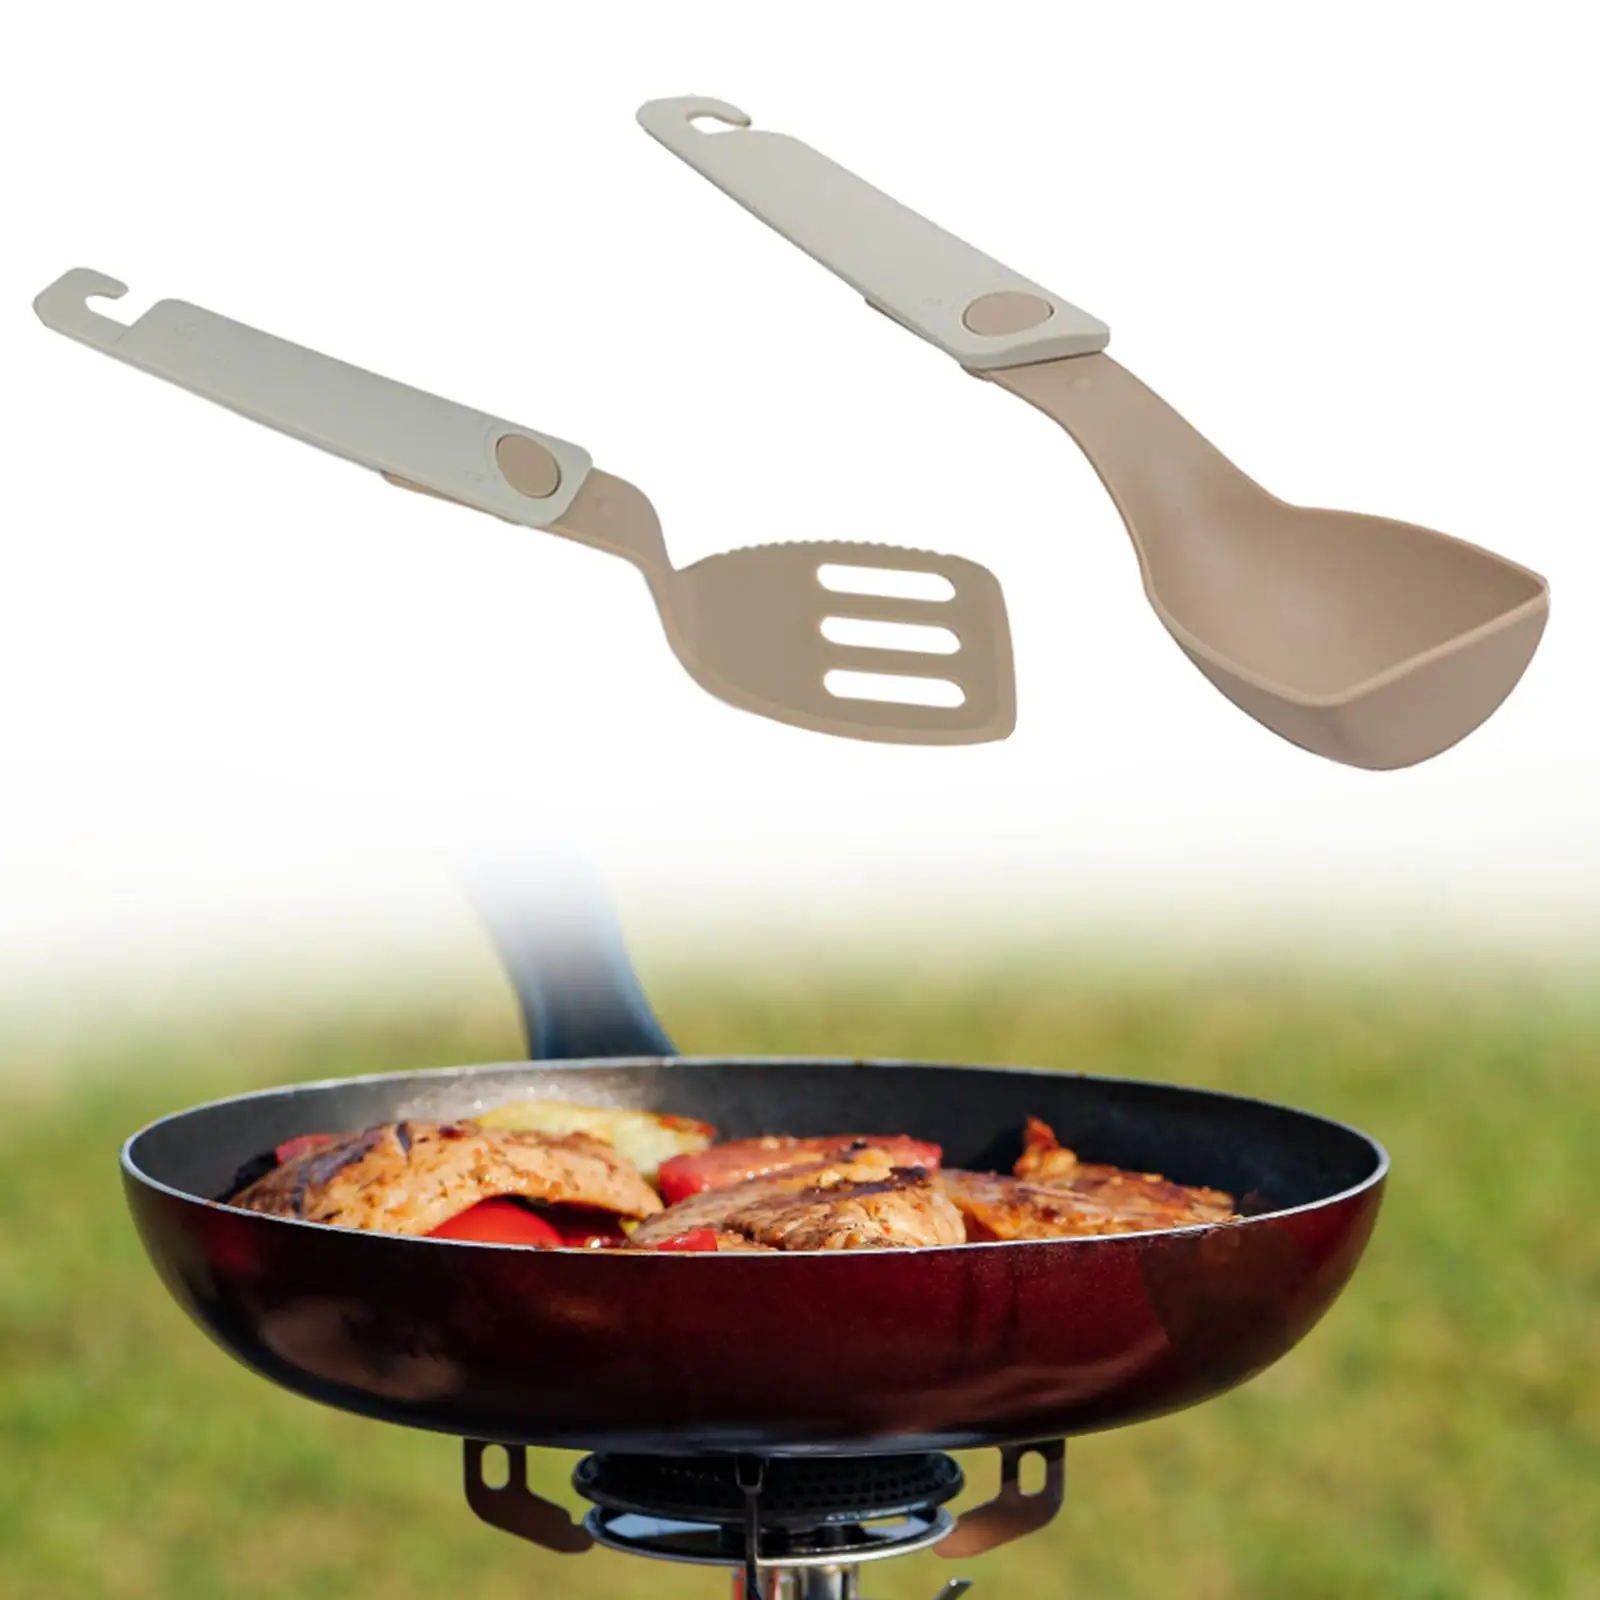 Camping Cutlery Folding Reusable Cooking Utensil Portable Outdoor Tableware Flatware for Barbecue Kitchen Picnic BBQ Backpacking